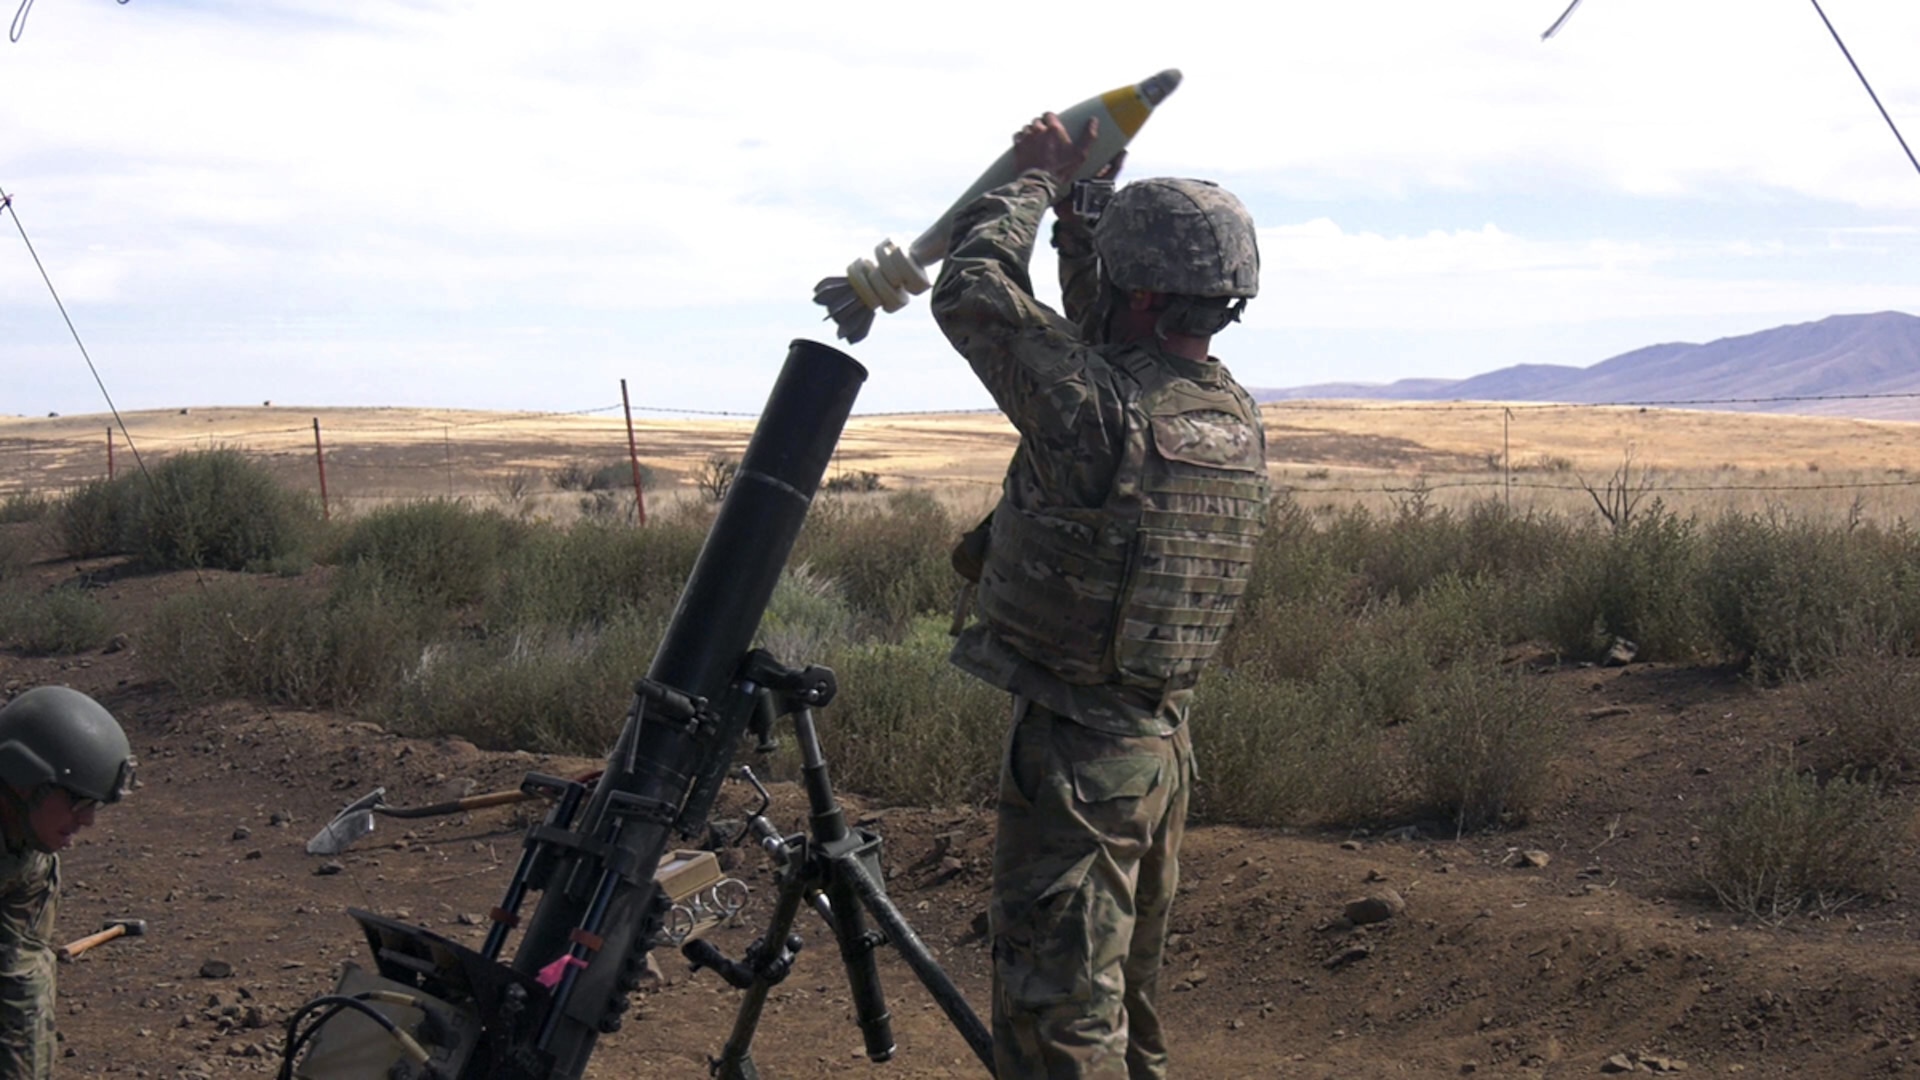 A Soldier from Headquarters and Headquarters Company, 2nd Battalion, 130th Infantry Regiment, based in Marion, Illinois, prepares to load a 120mm mortar shell during Rising Thunder 19.